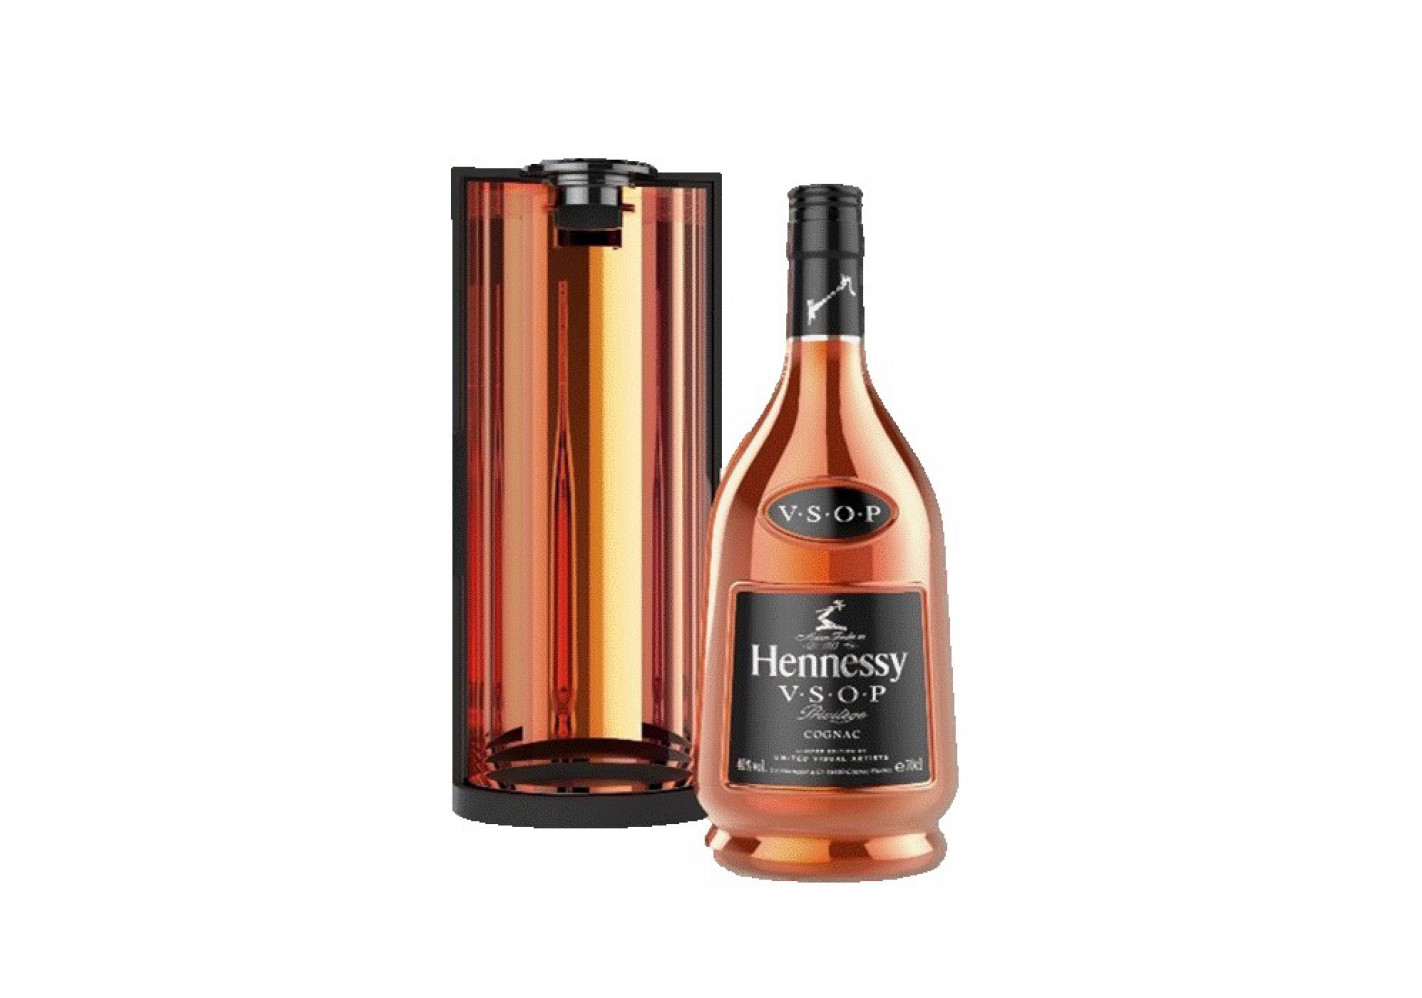 Hennessy V.S.O.P Limited Edition UVA Pack 2020